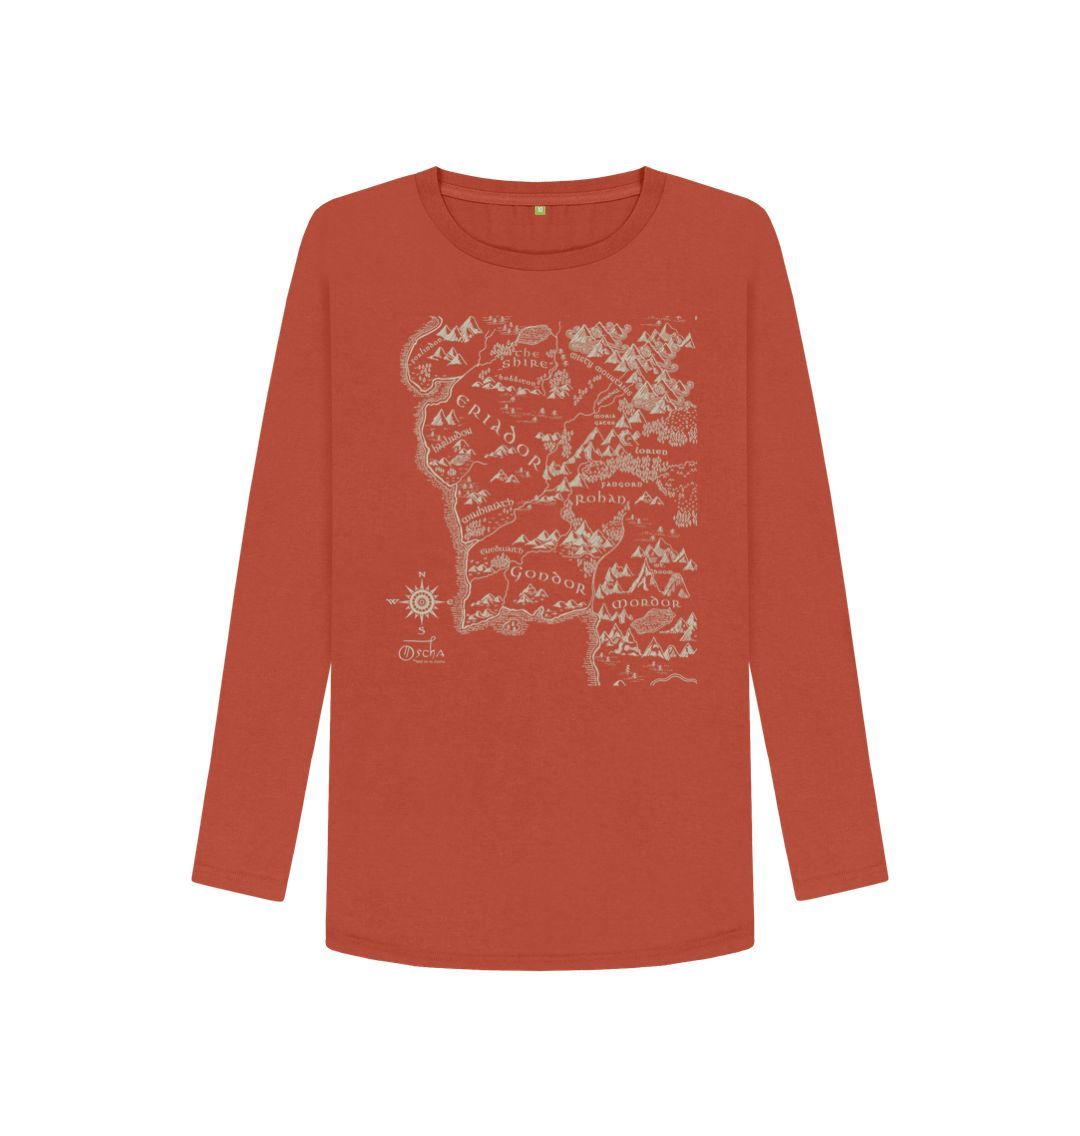 Rust Realm of MIDDLE-EARTH\u2122 Women's Long Sleeved T-Shirt